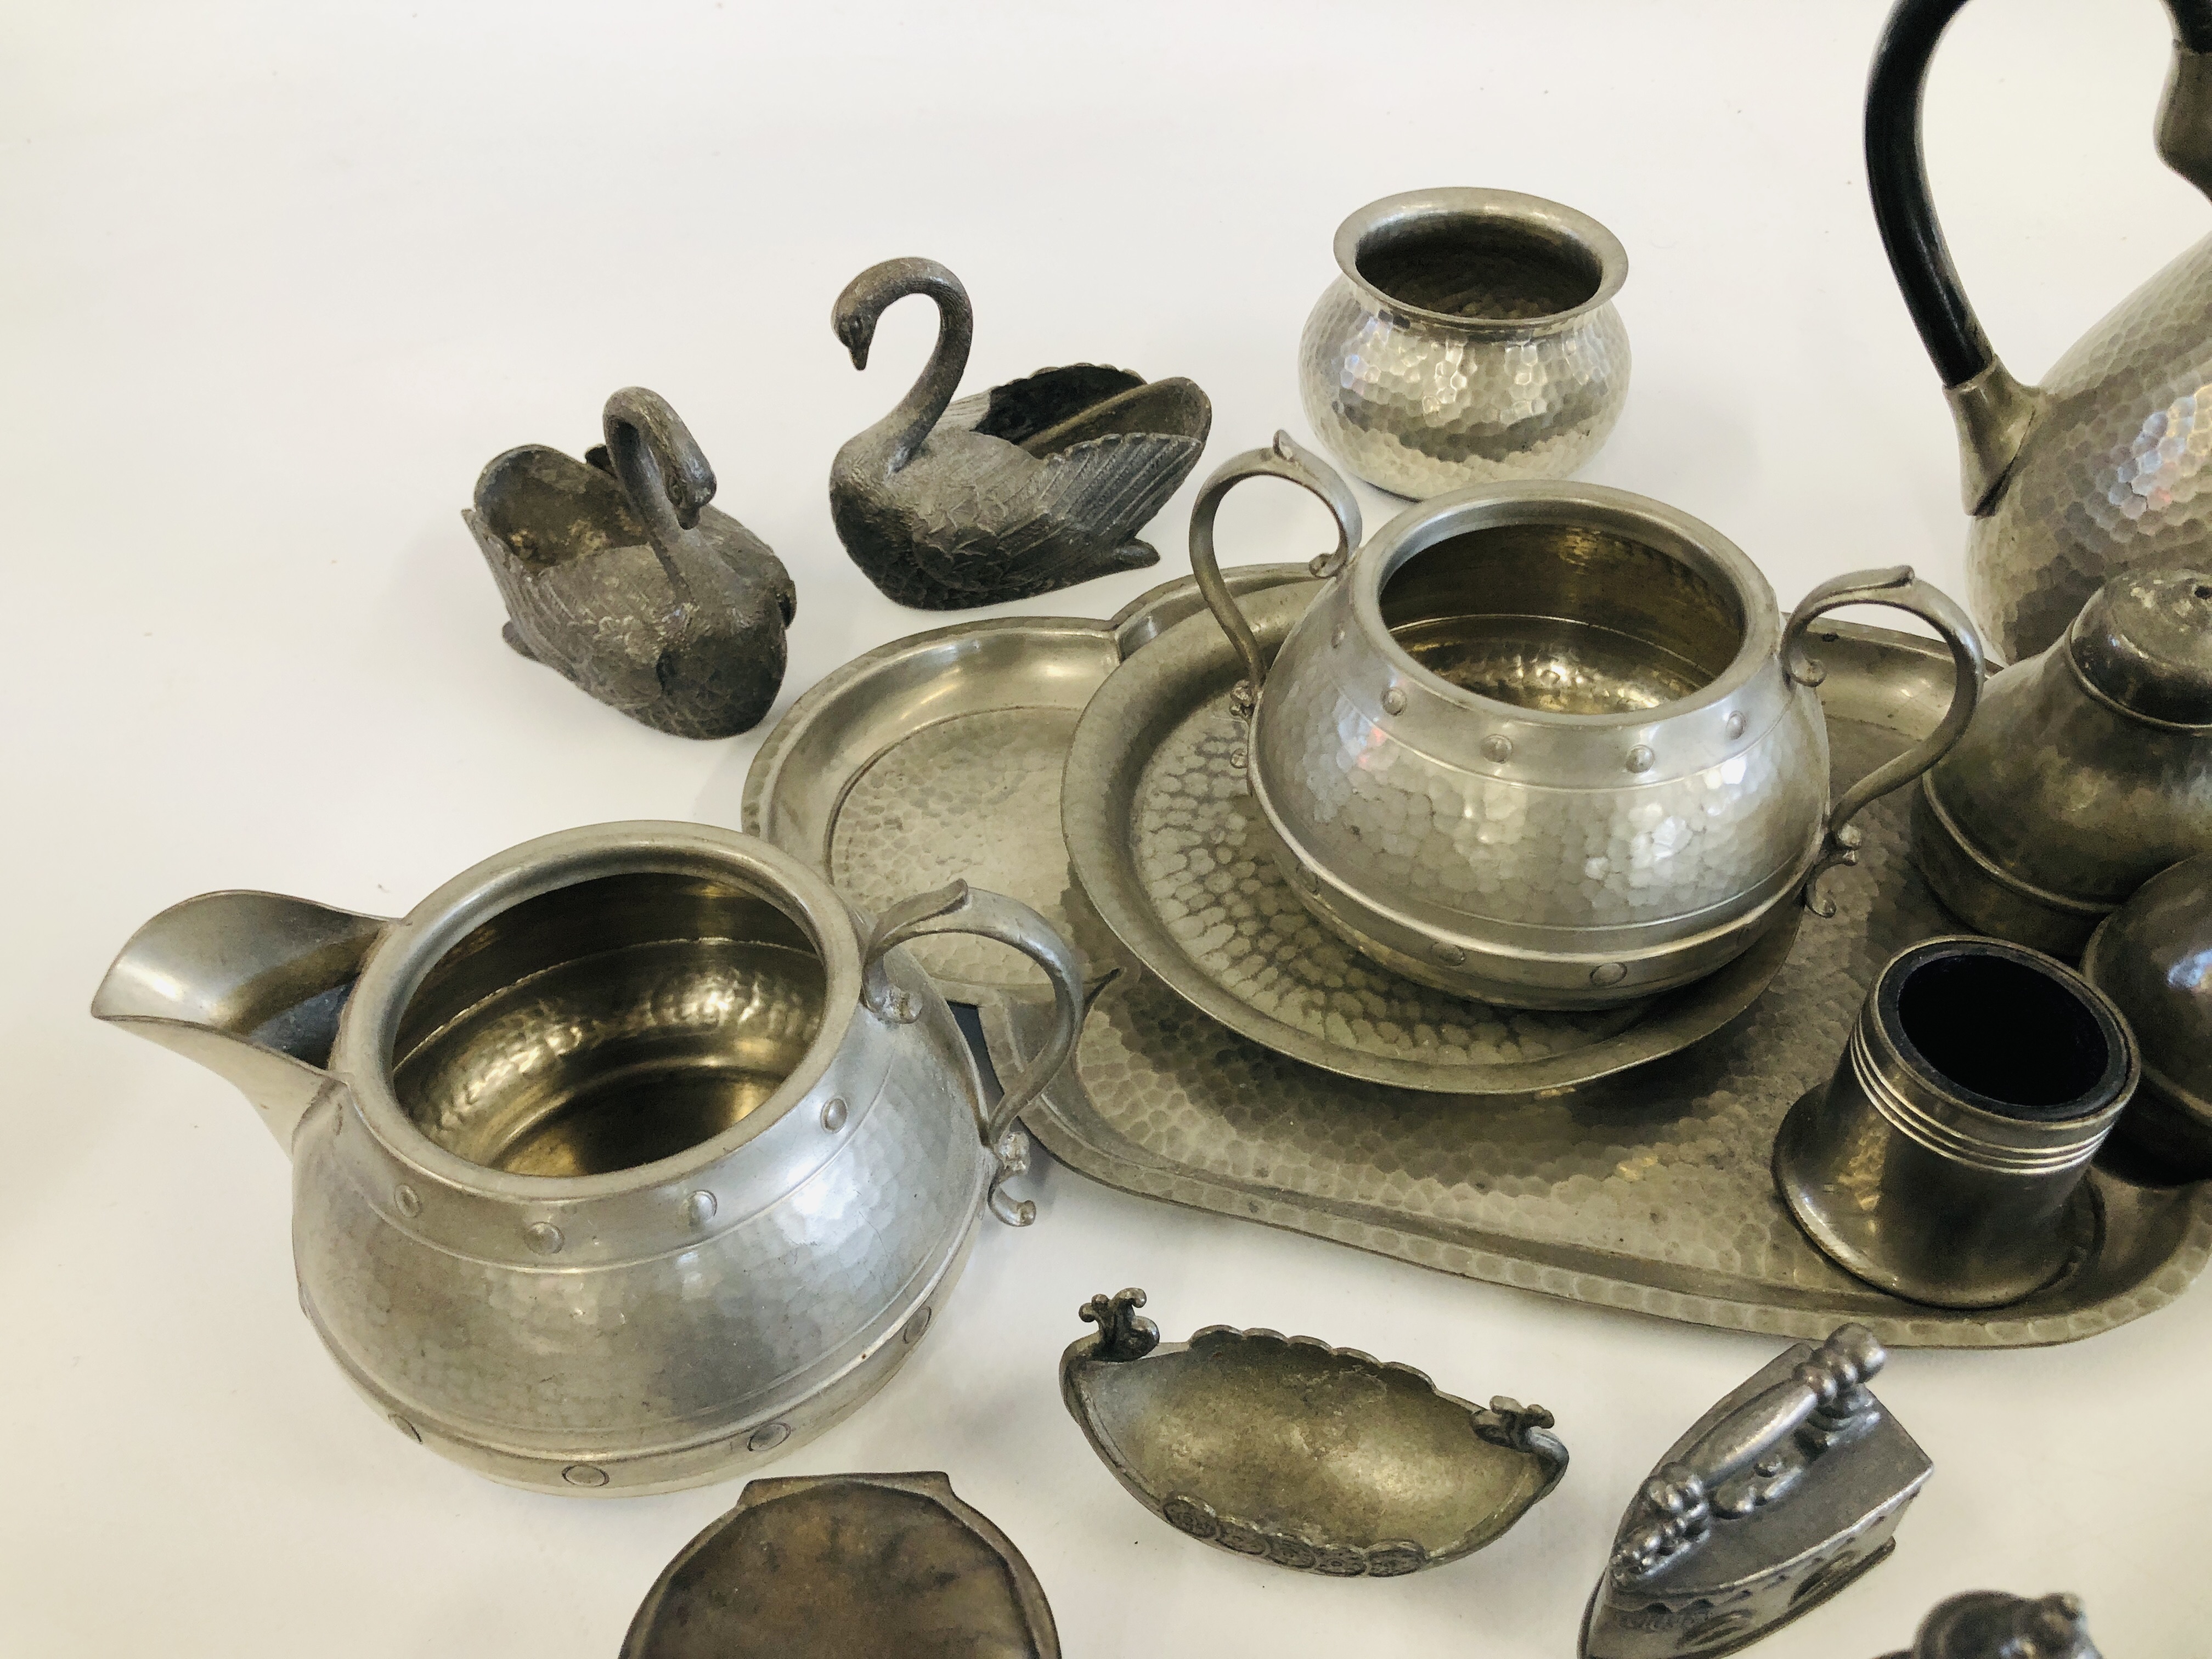 A BOX OF ASSORTED PLATED WARES ALONG WITH A BOX OF PEWTER WARES TO INCLUDE MINIATURE EXAMPLES. - Image 10 of 11